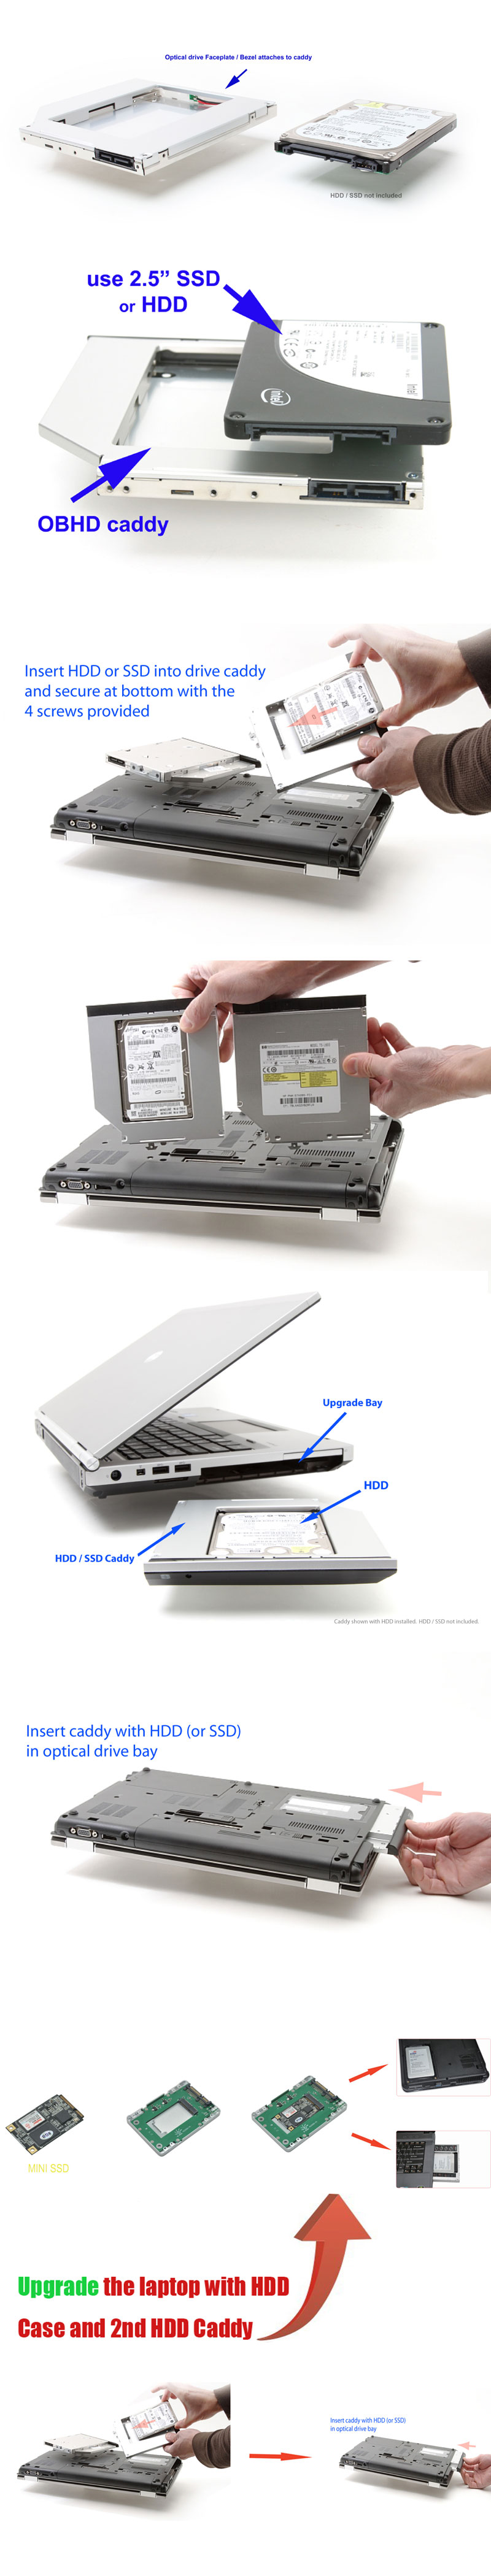 install step of hdd caddy